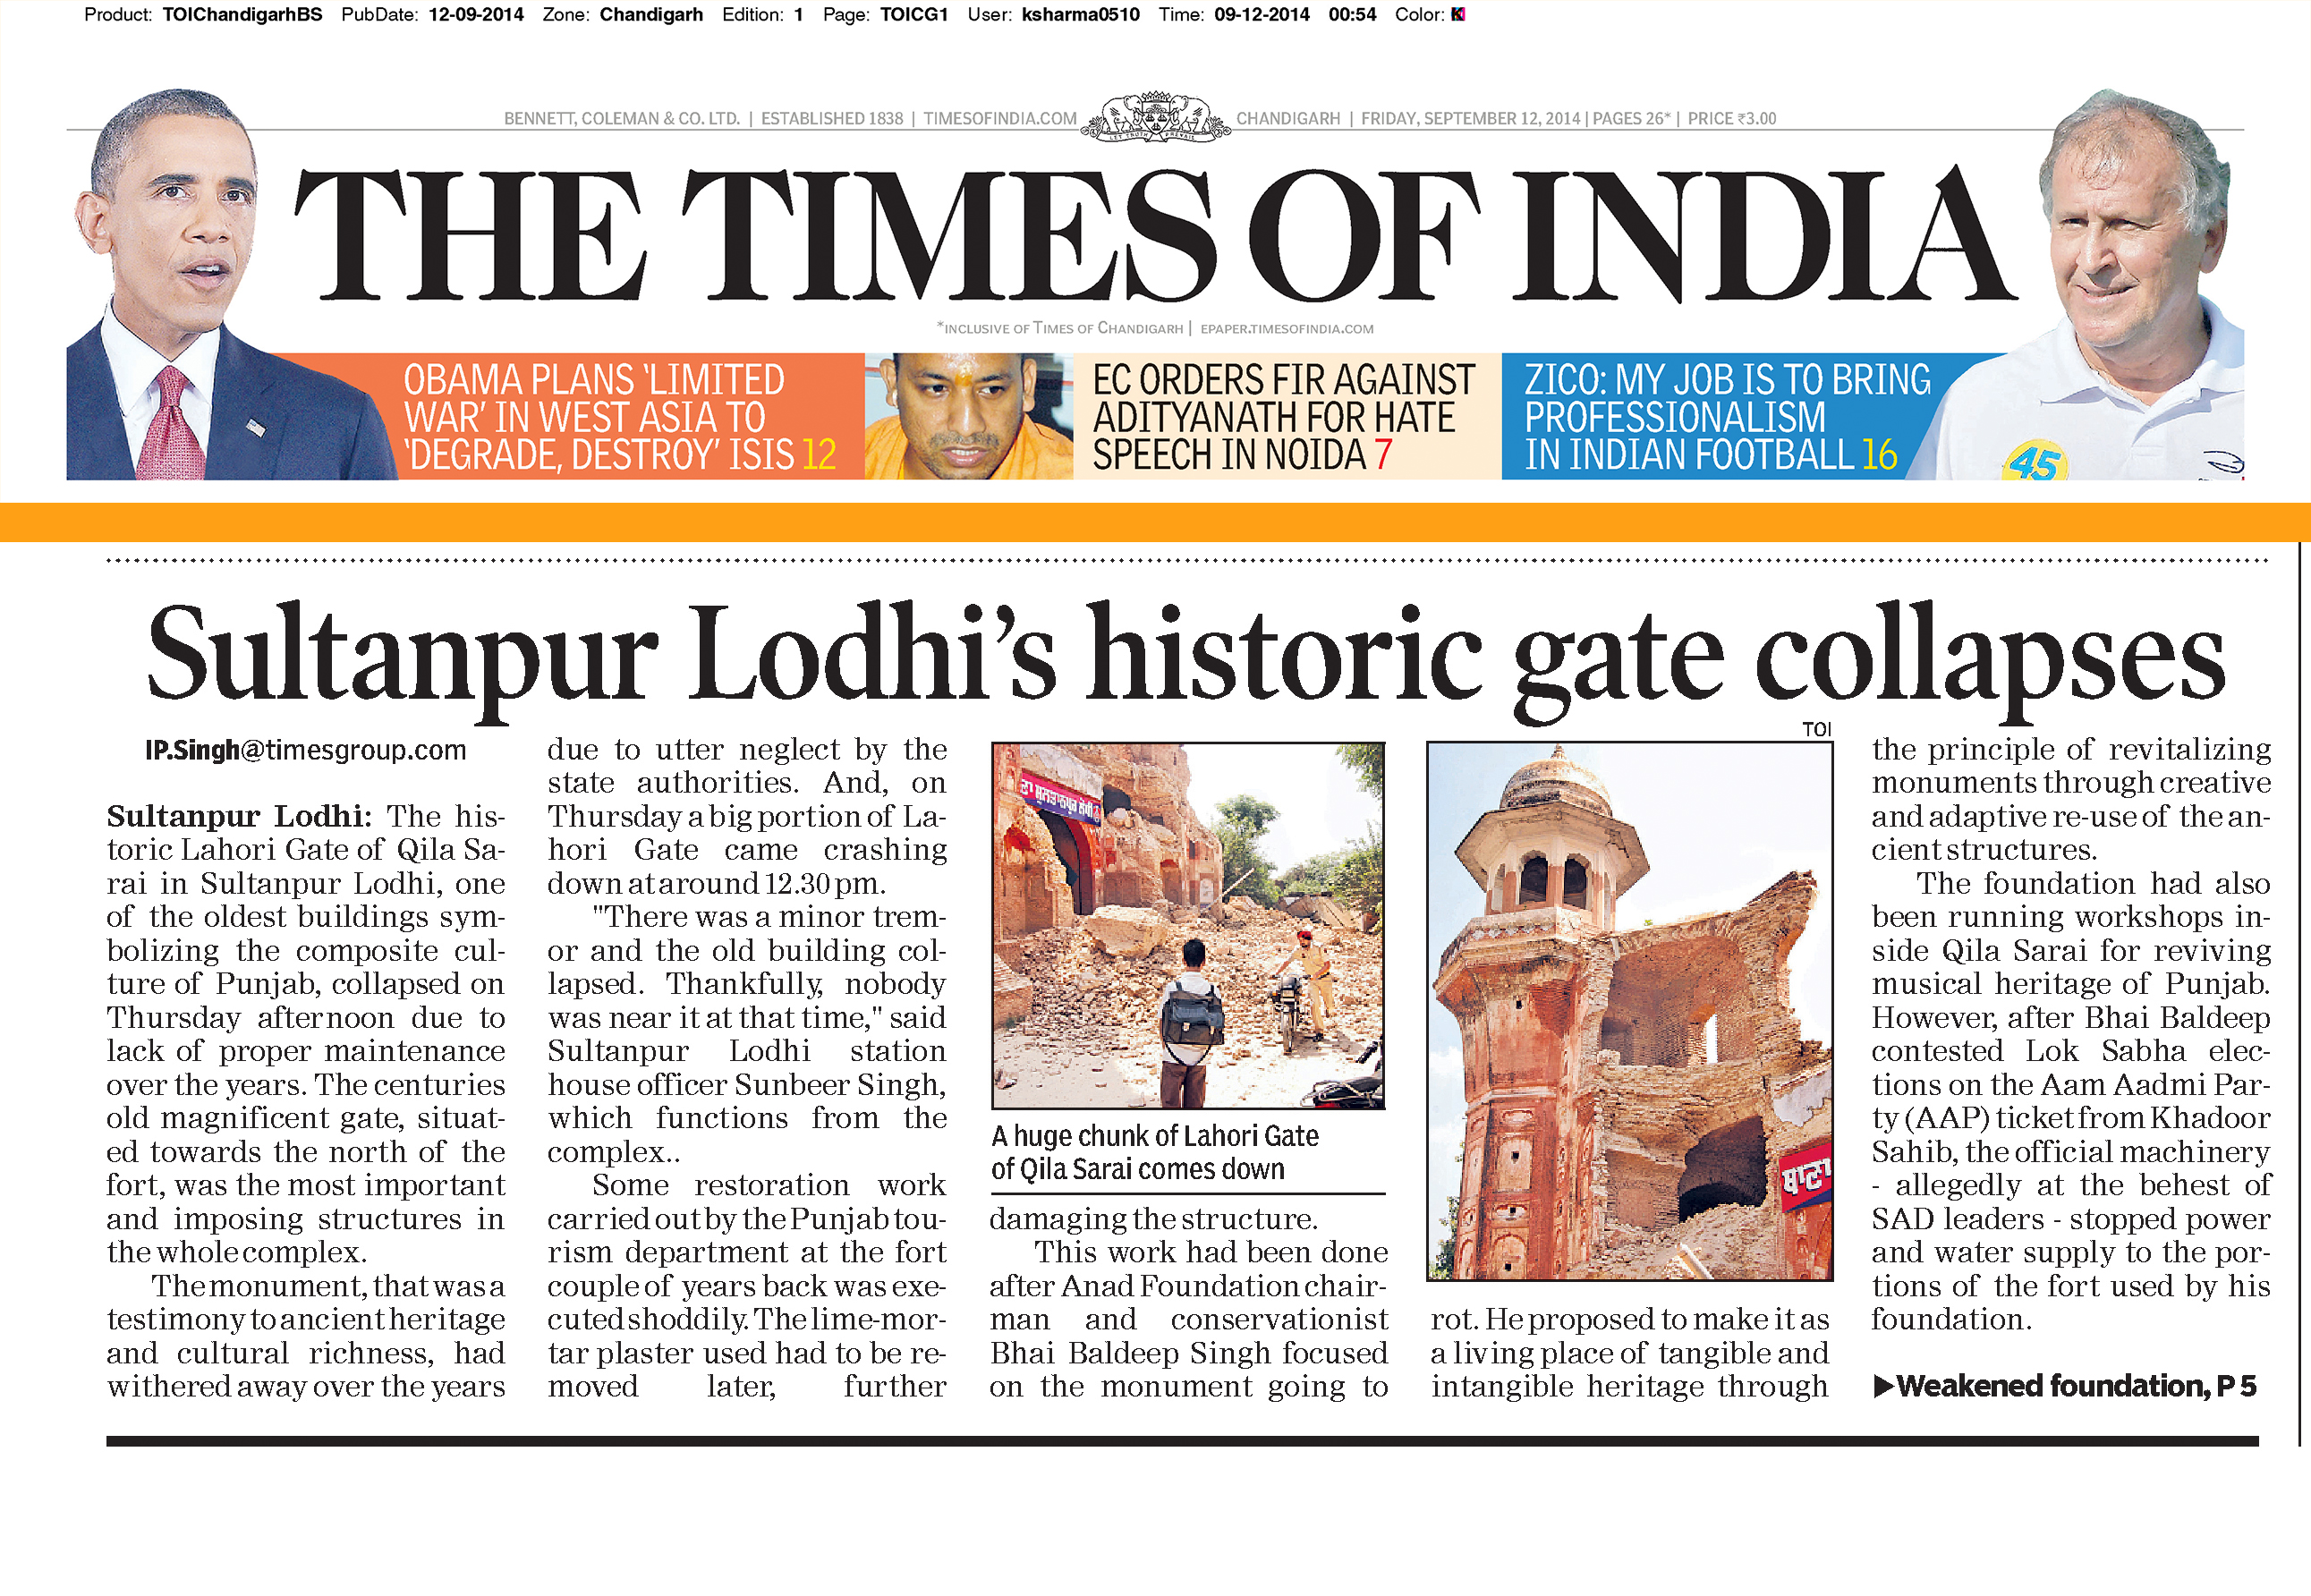 2014 09 12 TIMES OF INDIA Frontpage by IP Singh | Anad Foundation